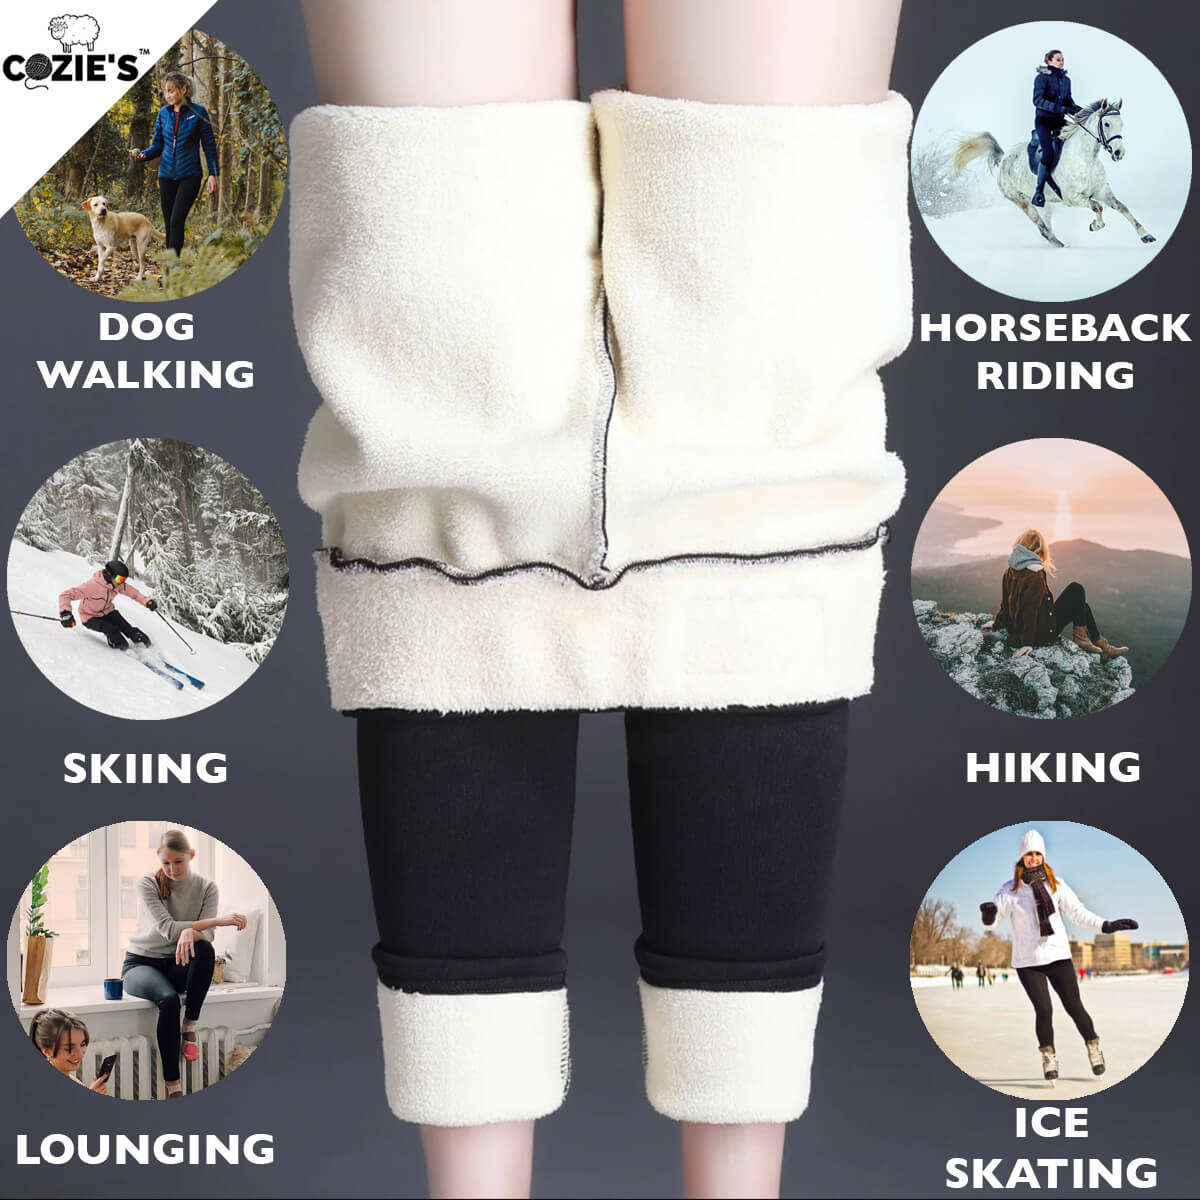 The Comfiest Leggings in the World! – Cozie's™